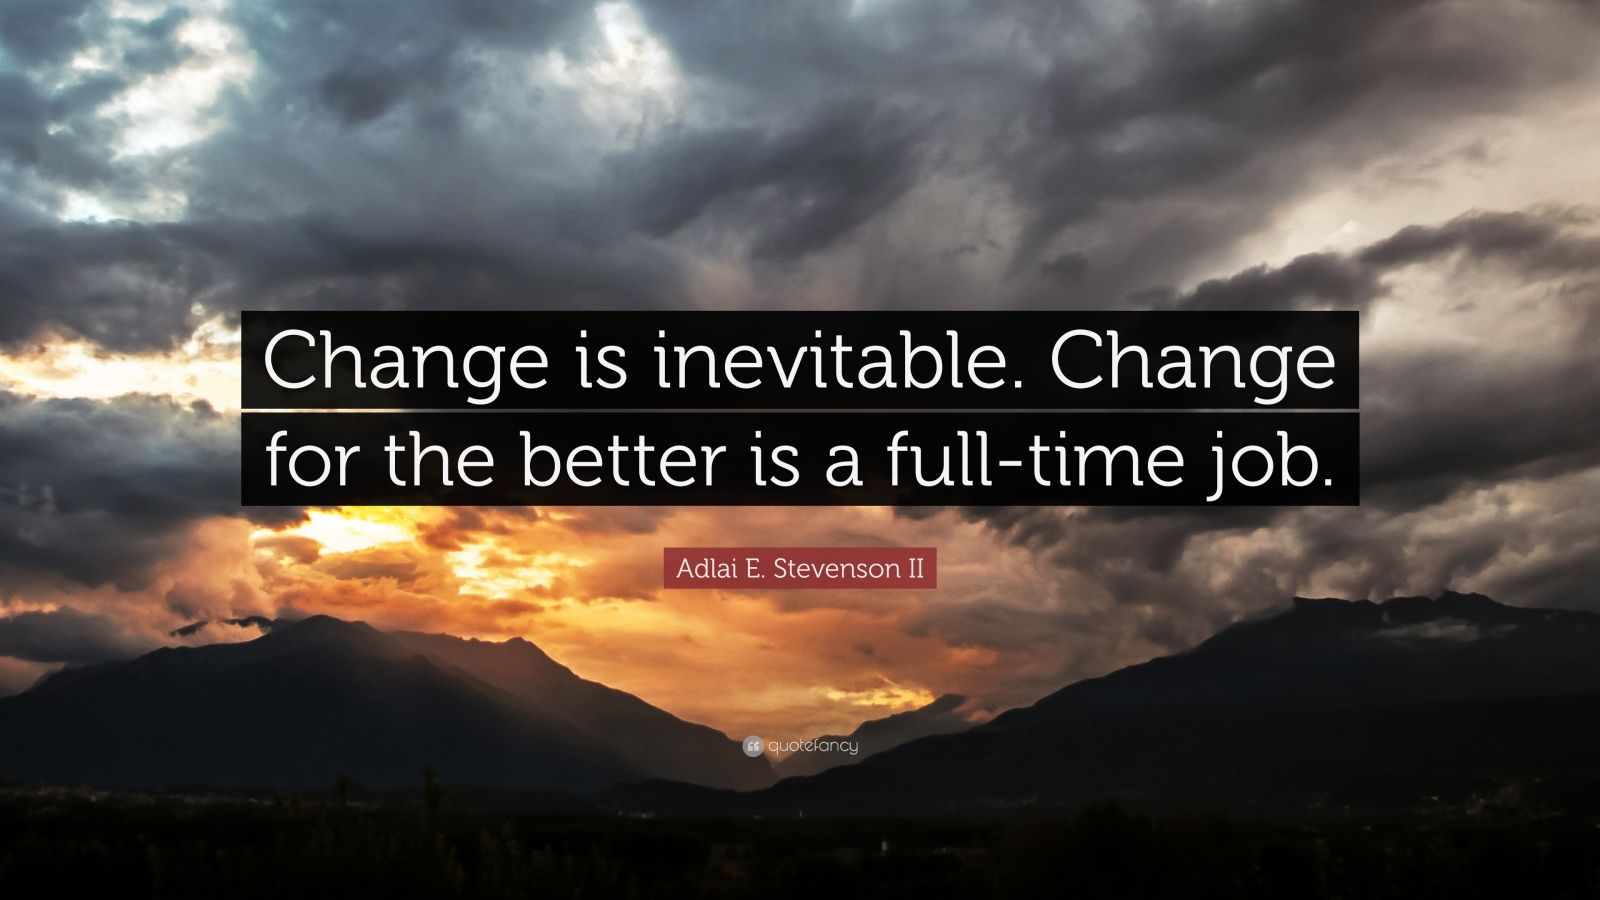 Adlai E. Stevenson II Quote: “Change is inevitable. Change for the better is a full-time job.”